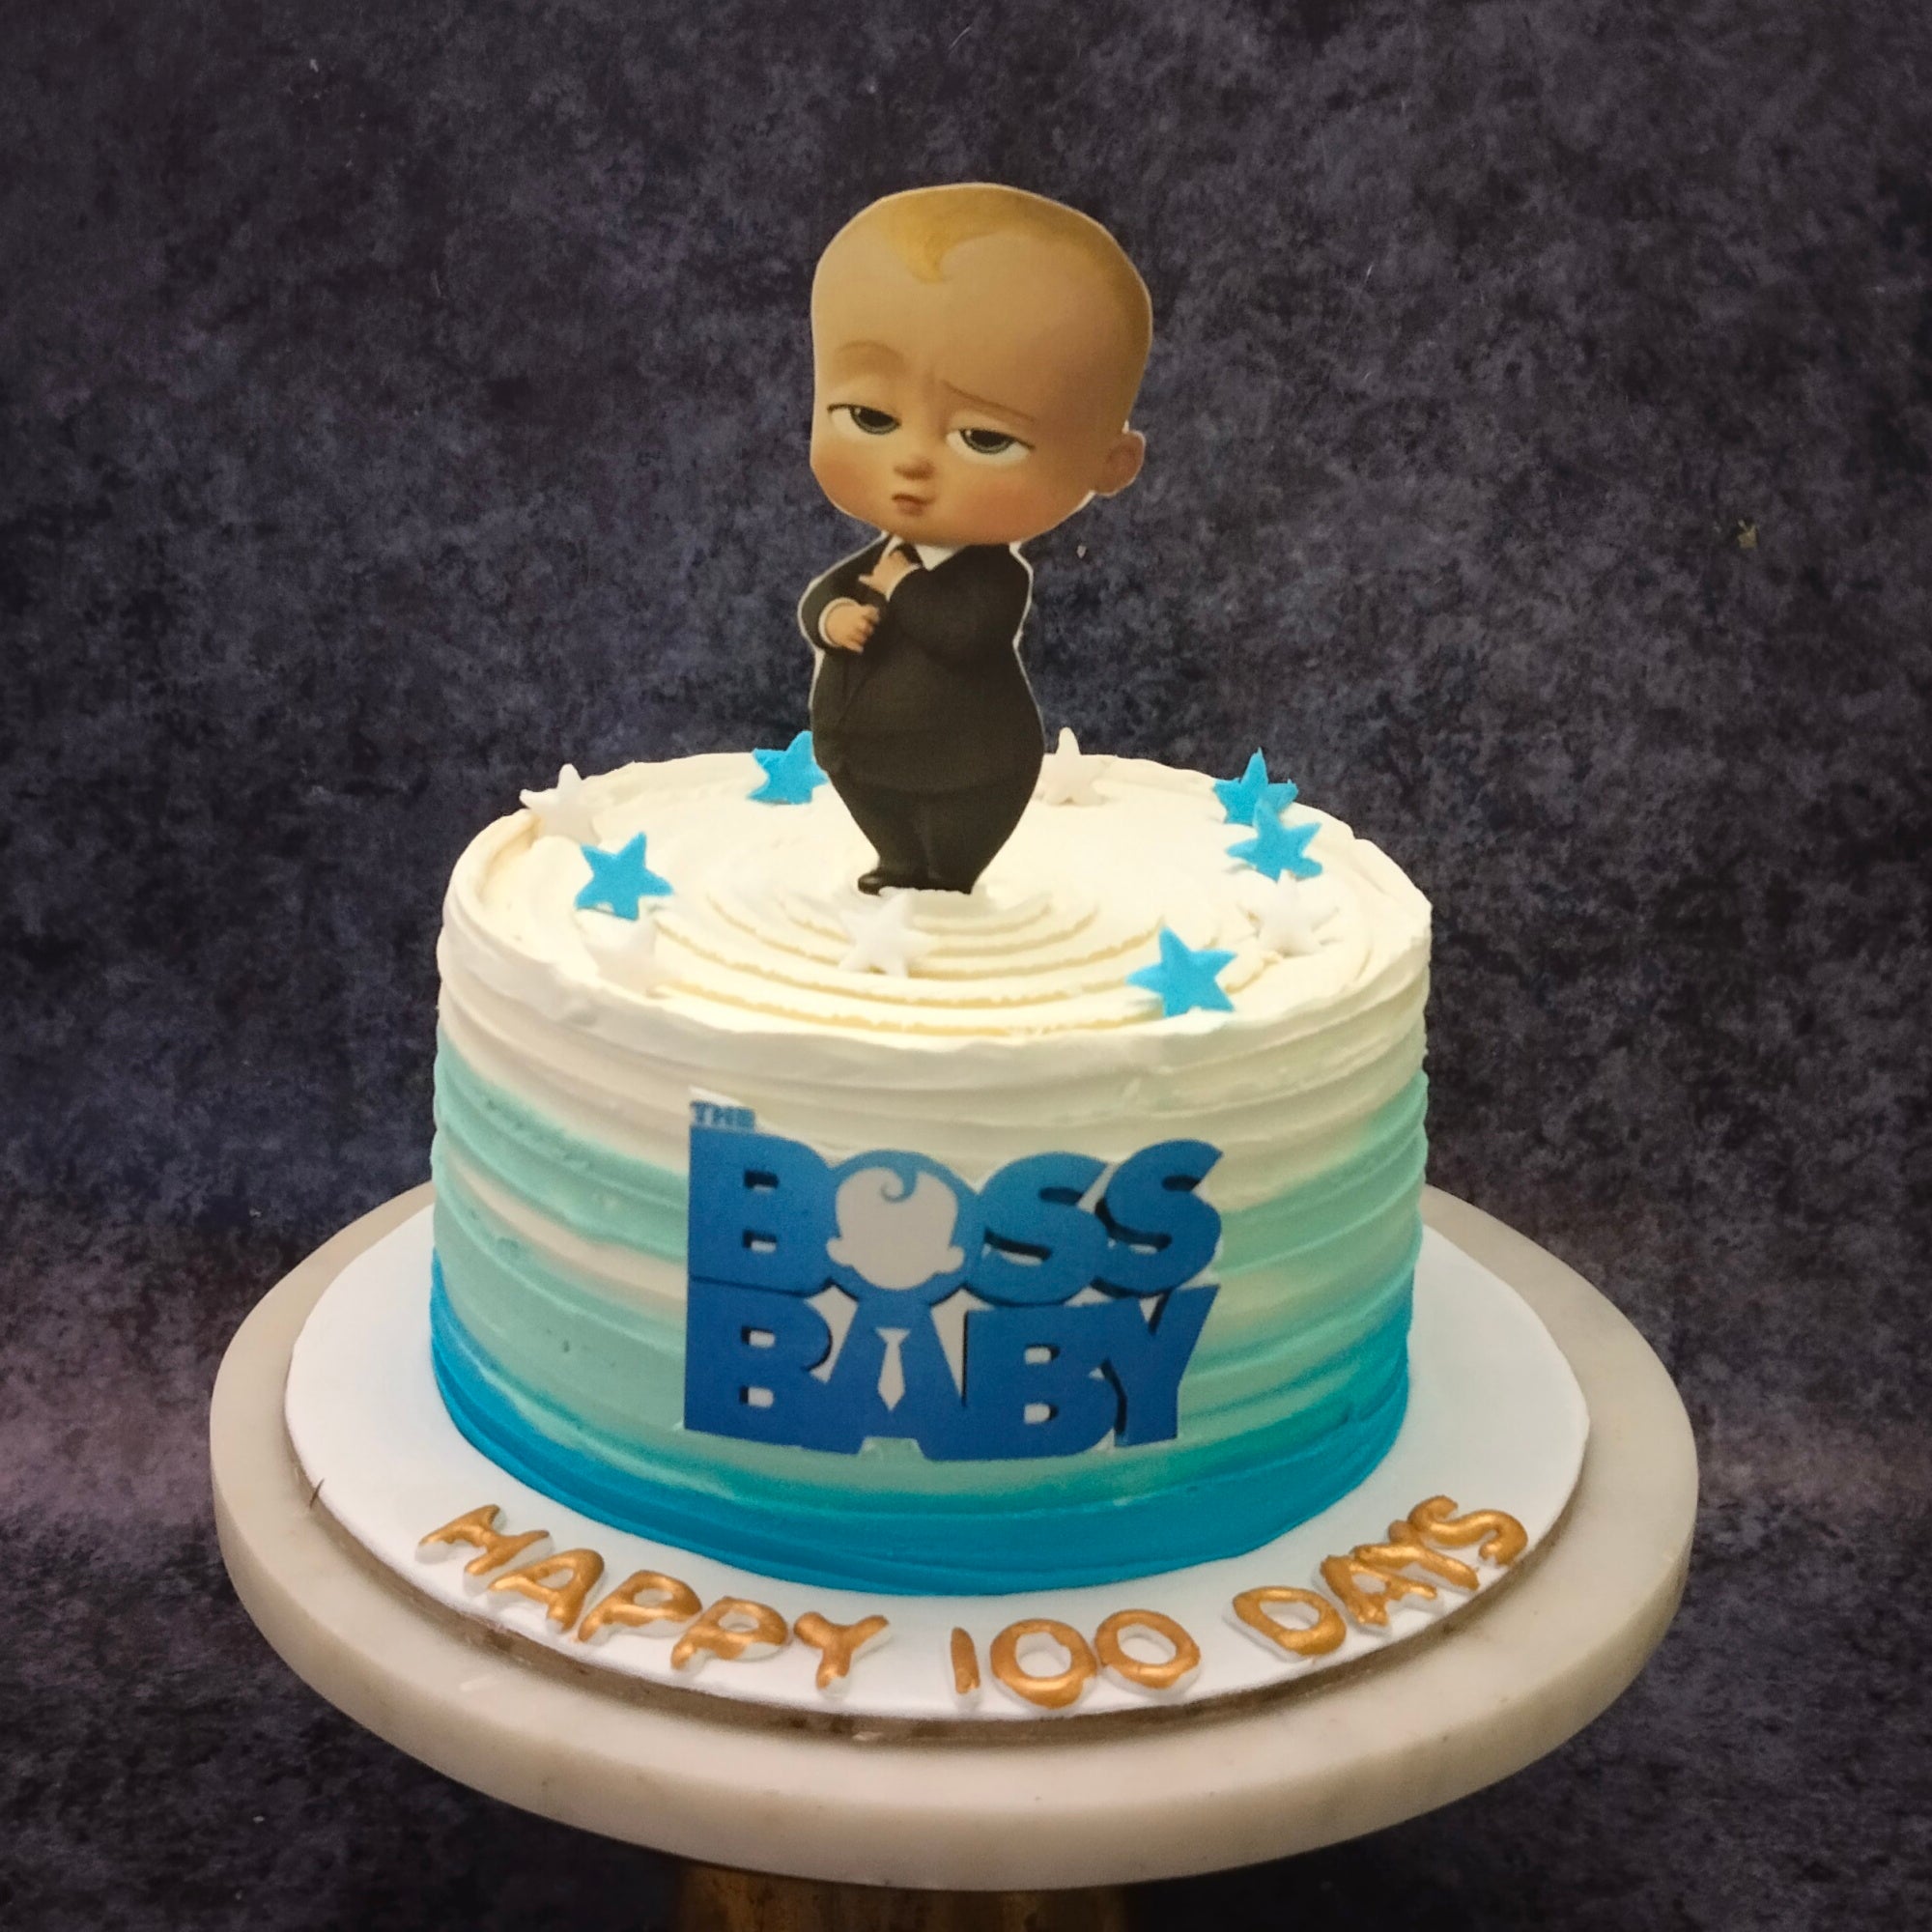 Baby Boss Cake - Bakers Talent - Exotic Desserts, Customized Cakes,  Macarons, Cupcakes